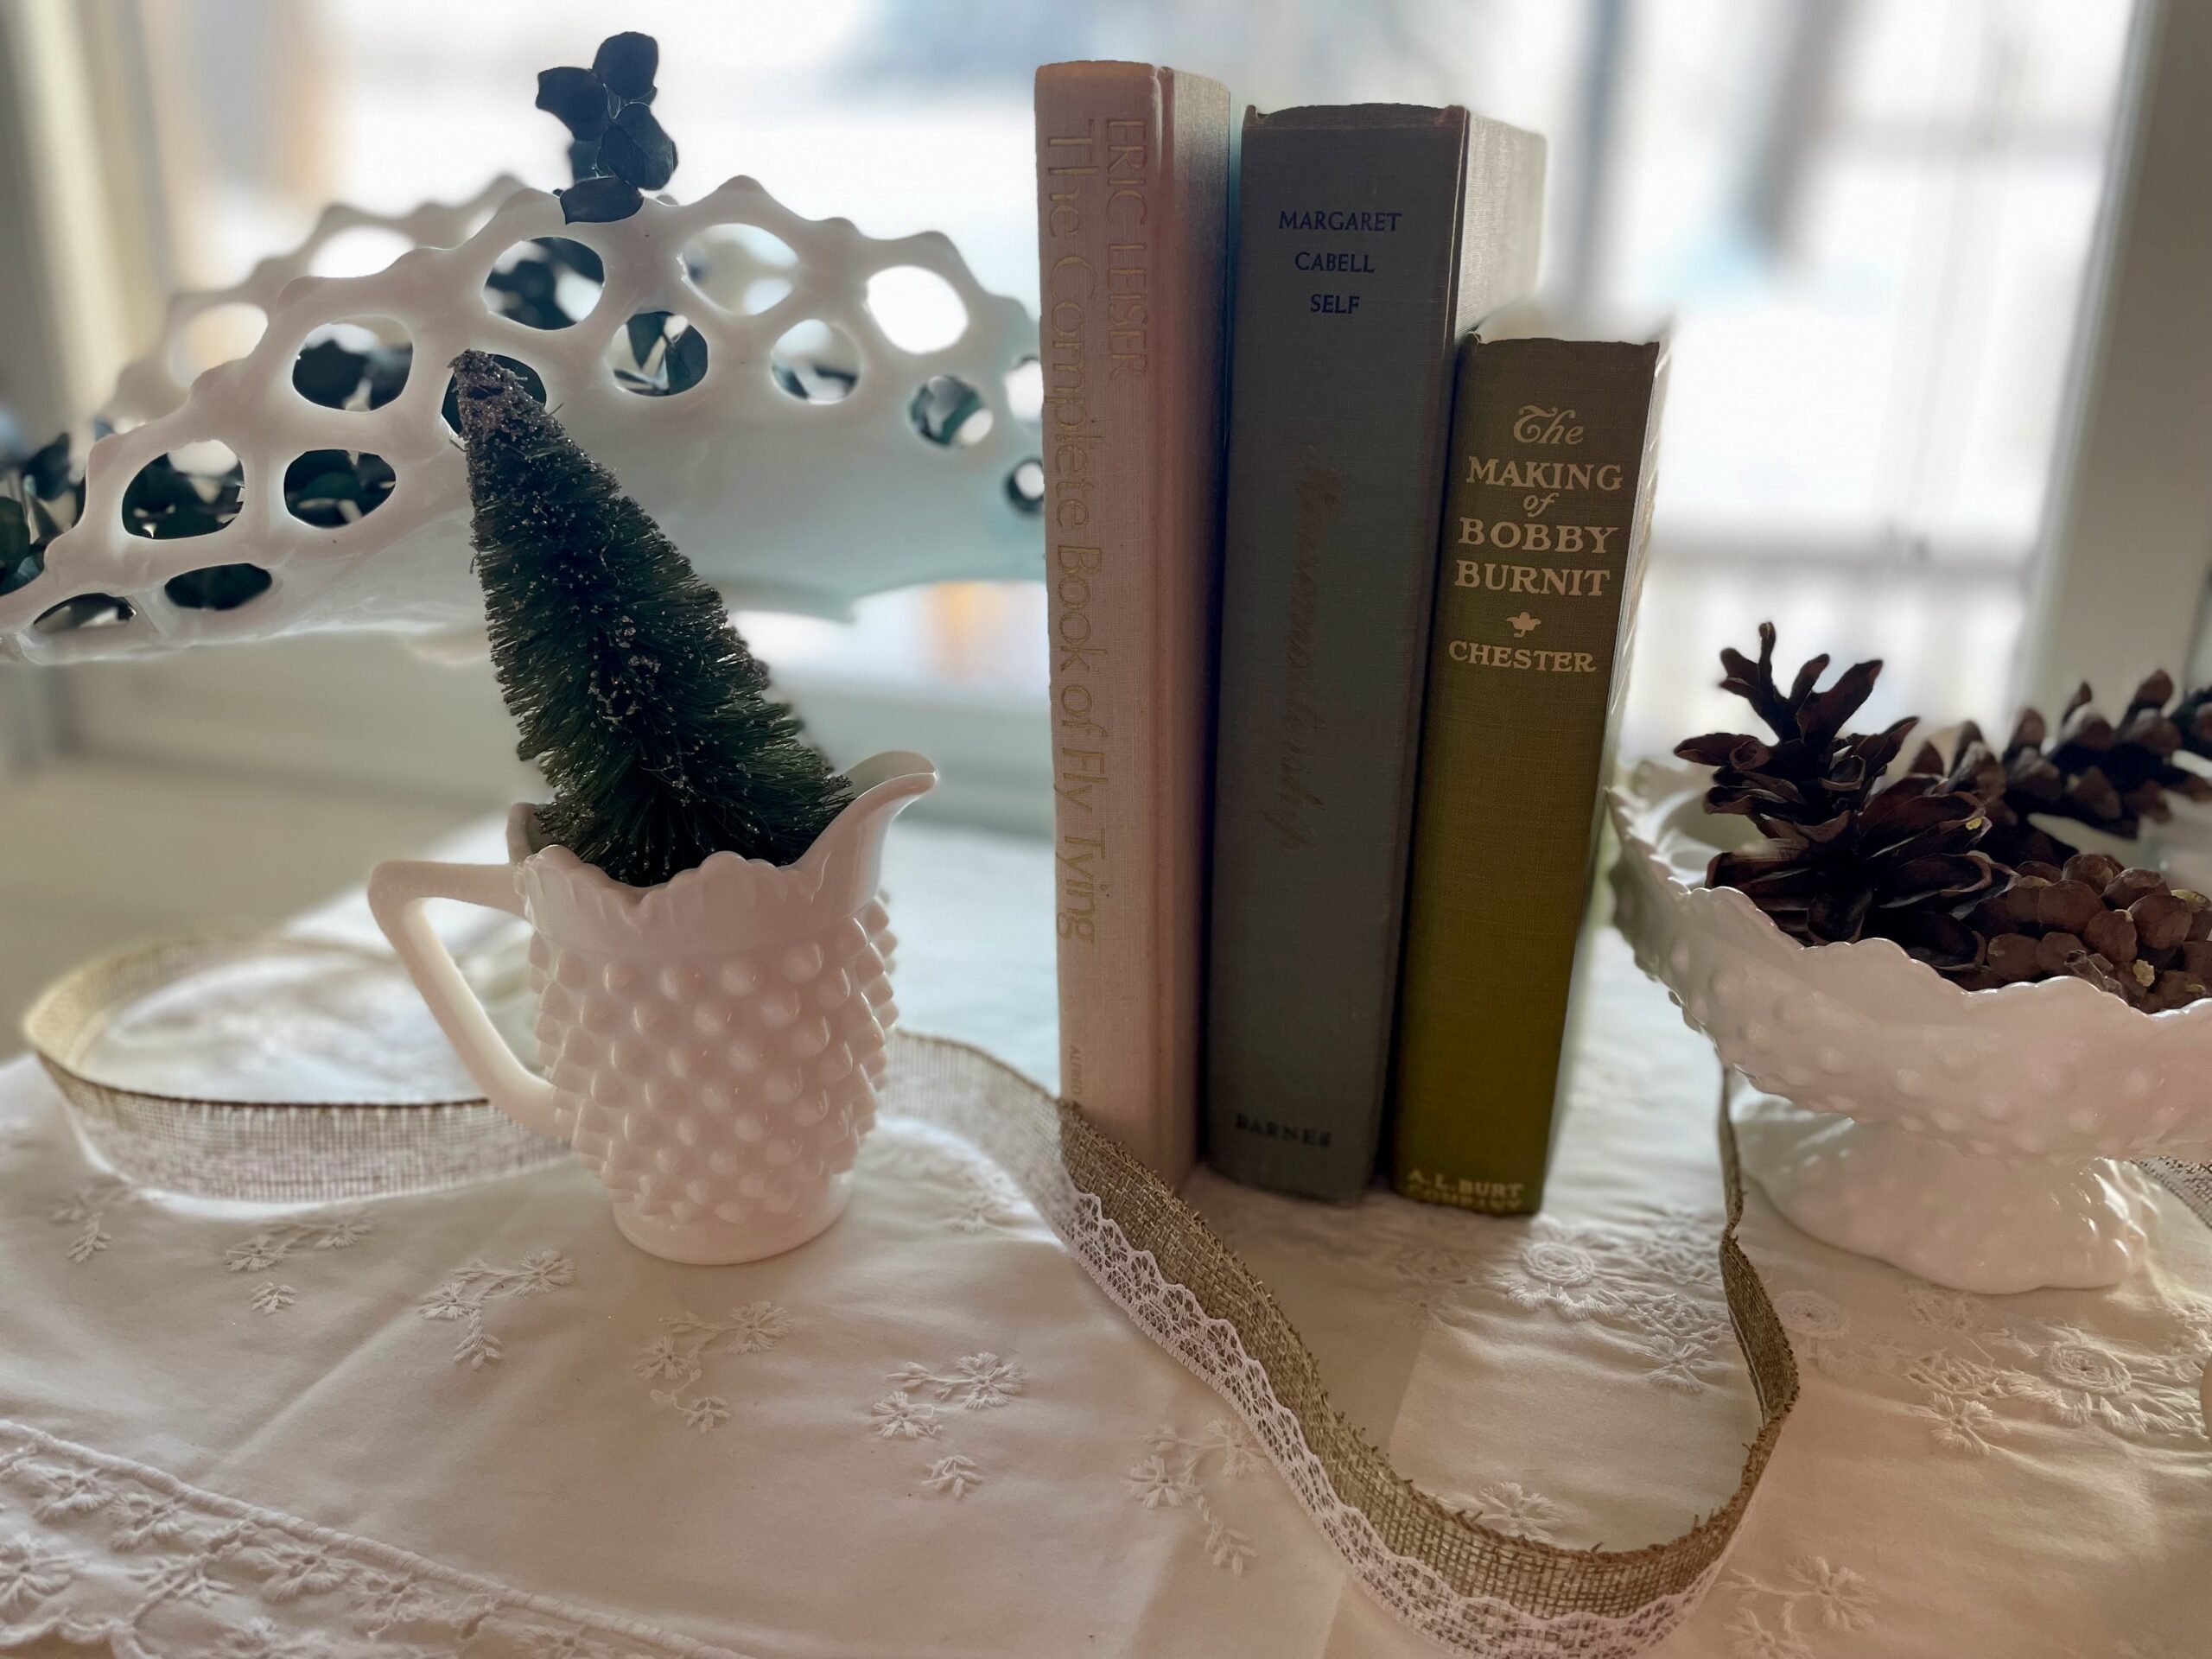 vintage milk glass and decor used for a winter vignette